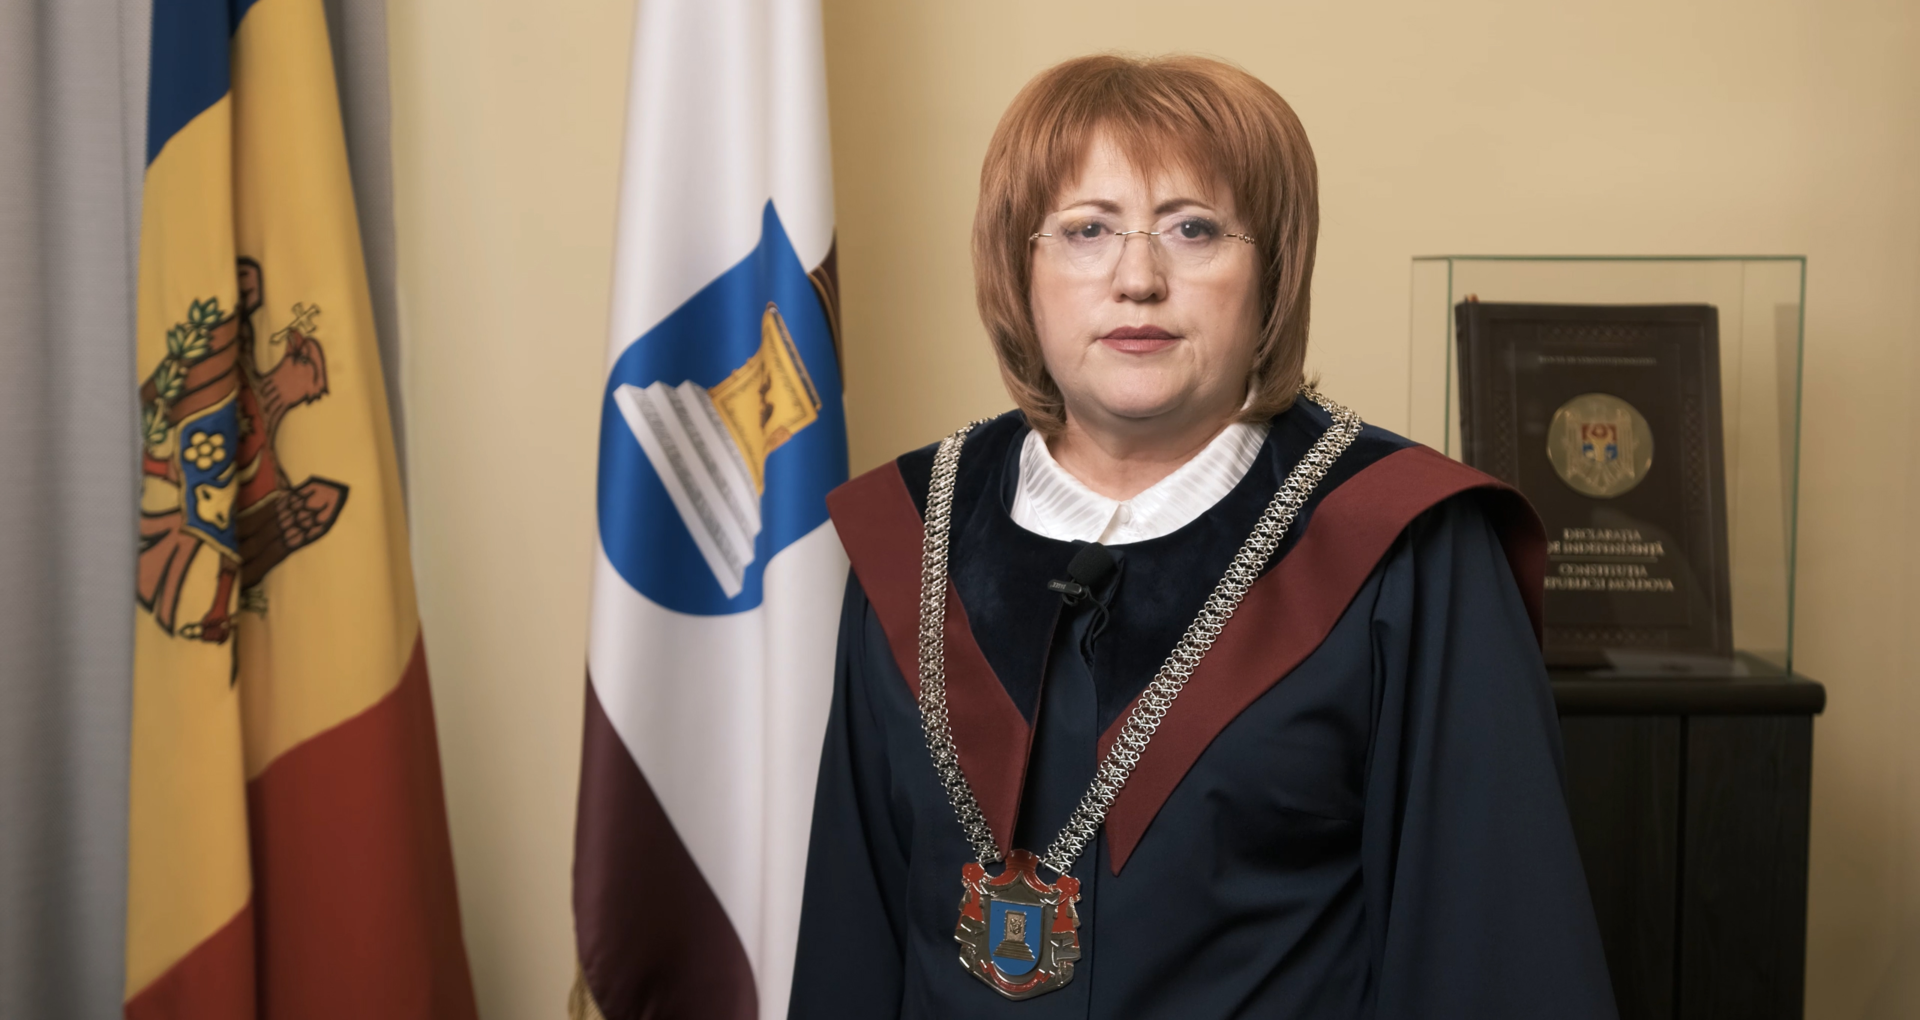 A member of the Superior Council of Magistracy considers that there are suspicions that Gheorghe Balan, the judge who is examining the case against Andronachi and Blonschi and who has accused him of being intimidated, has committed disciplinary offences